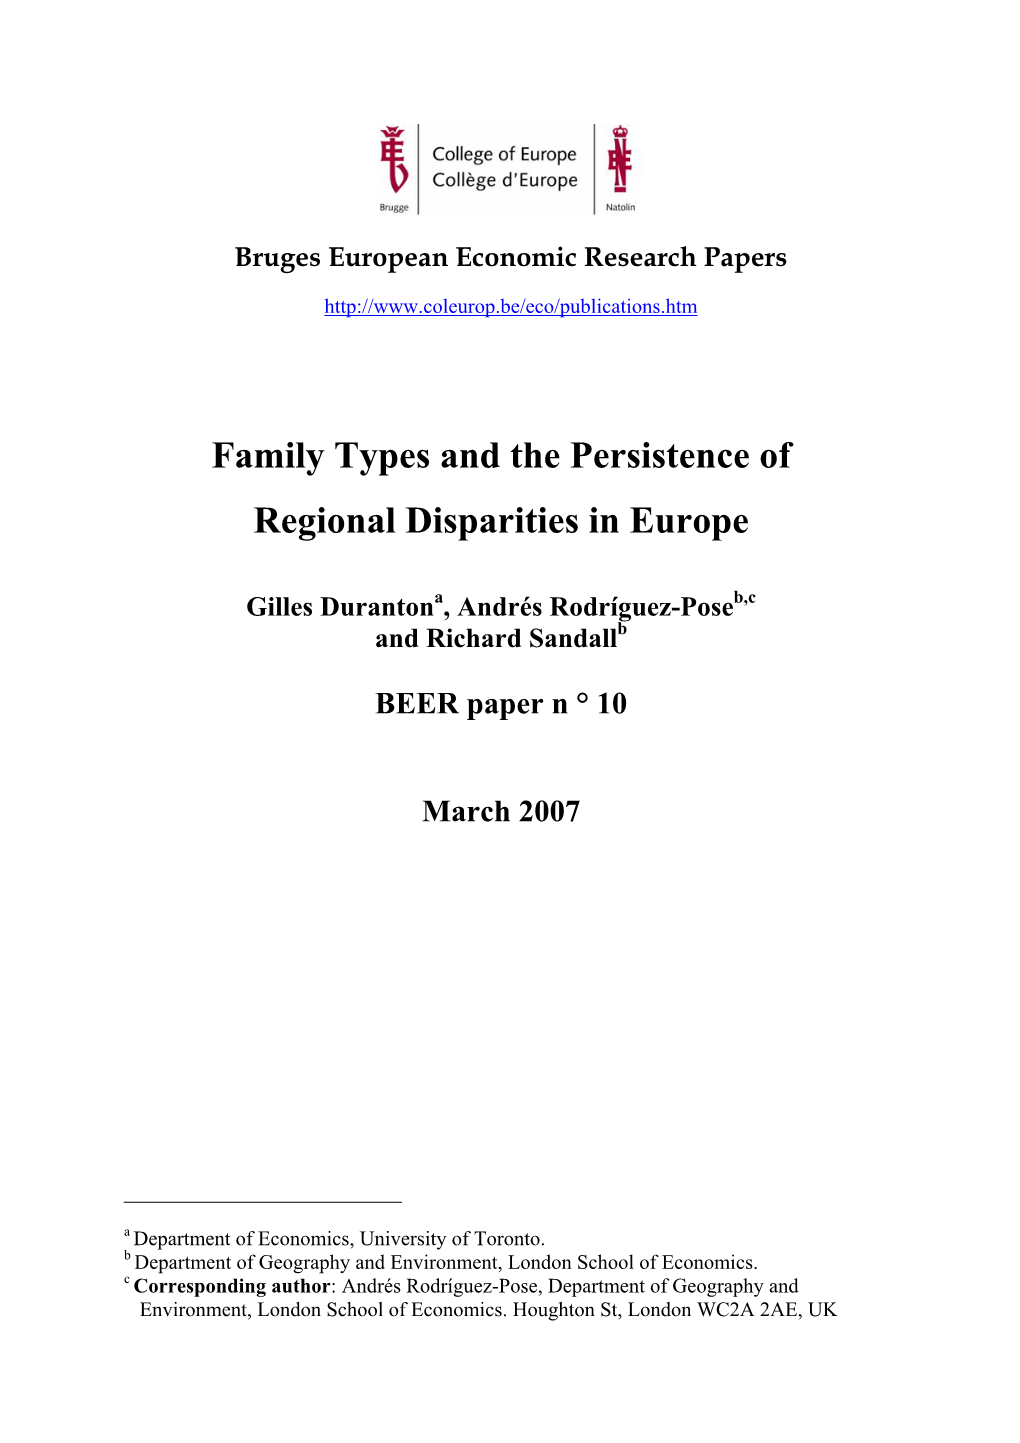 Family Types and the Persistence of Regional Disparities in Europe